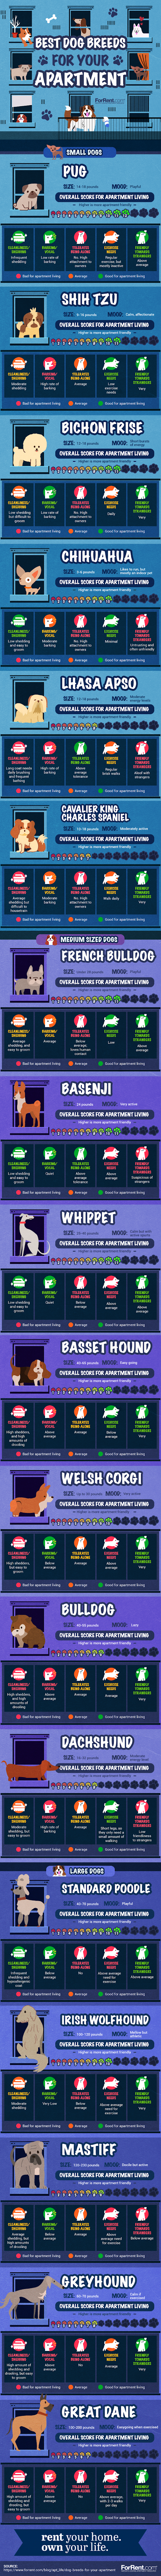 Best Dog Breeds for Apartment Living #infographic #lifestyle #Dog Breeds #pets & Animal #infographics #Apartment Living #Apartment Tips #Infographic